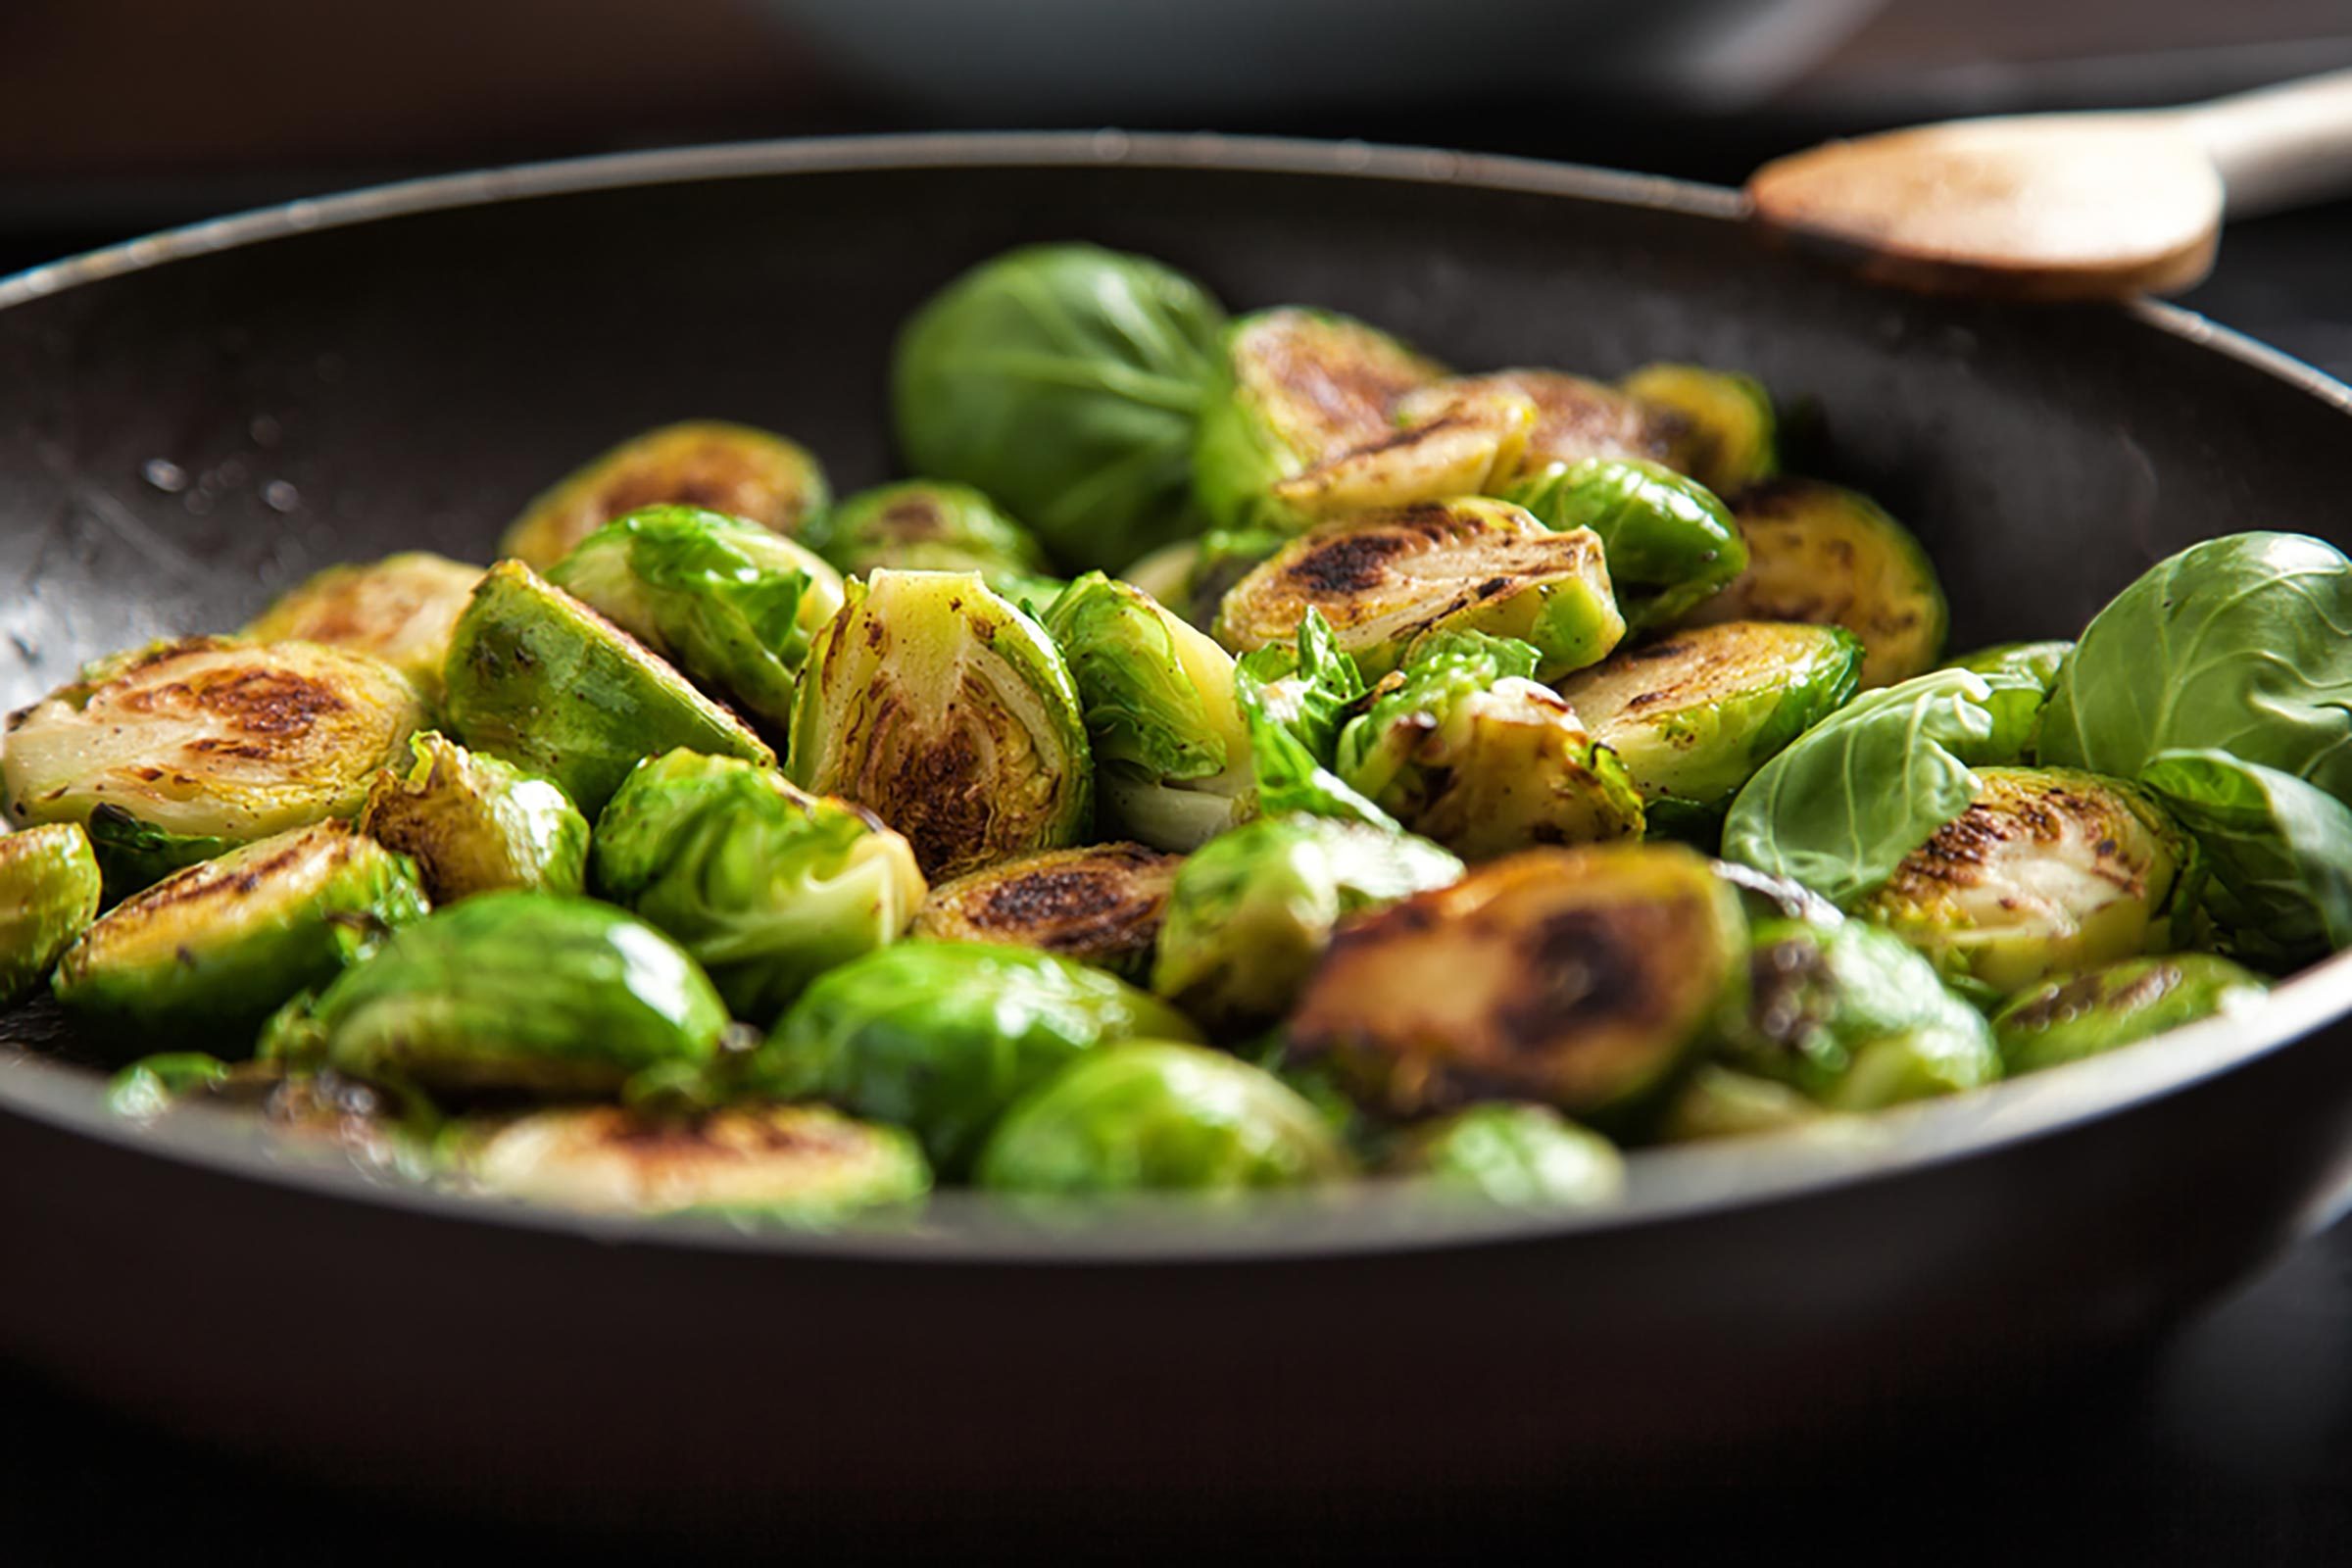 https://www.thehealthy.com/wp-content/uploads/2017/05/10_brusselsprouts_Most-Filling-Fruits-and-Vegetables-According-to-Nutritionists_378247339_Cara-Foto.jpg?fit=700%2C467